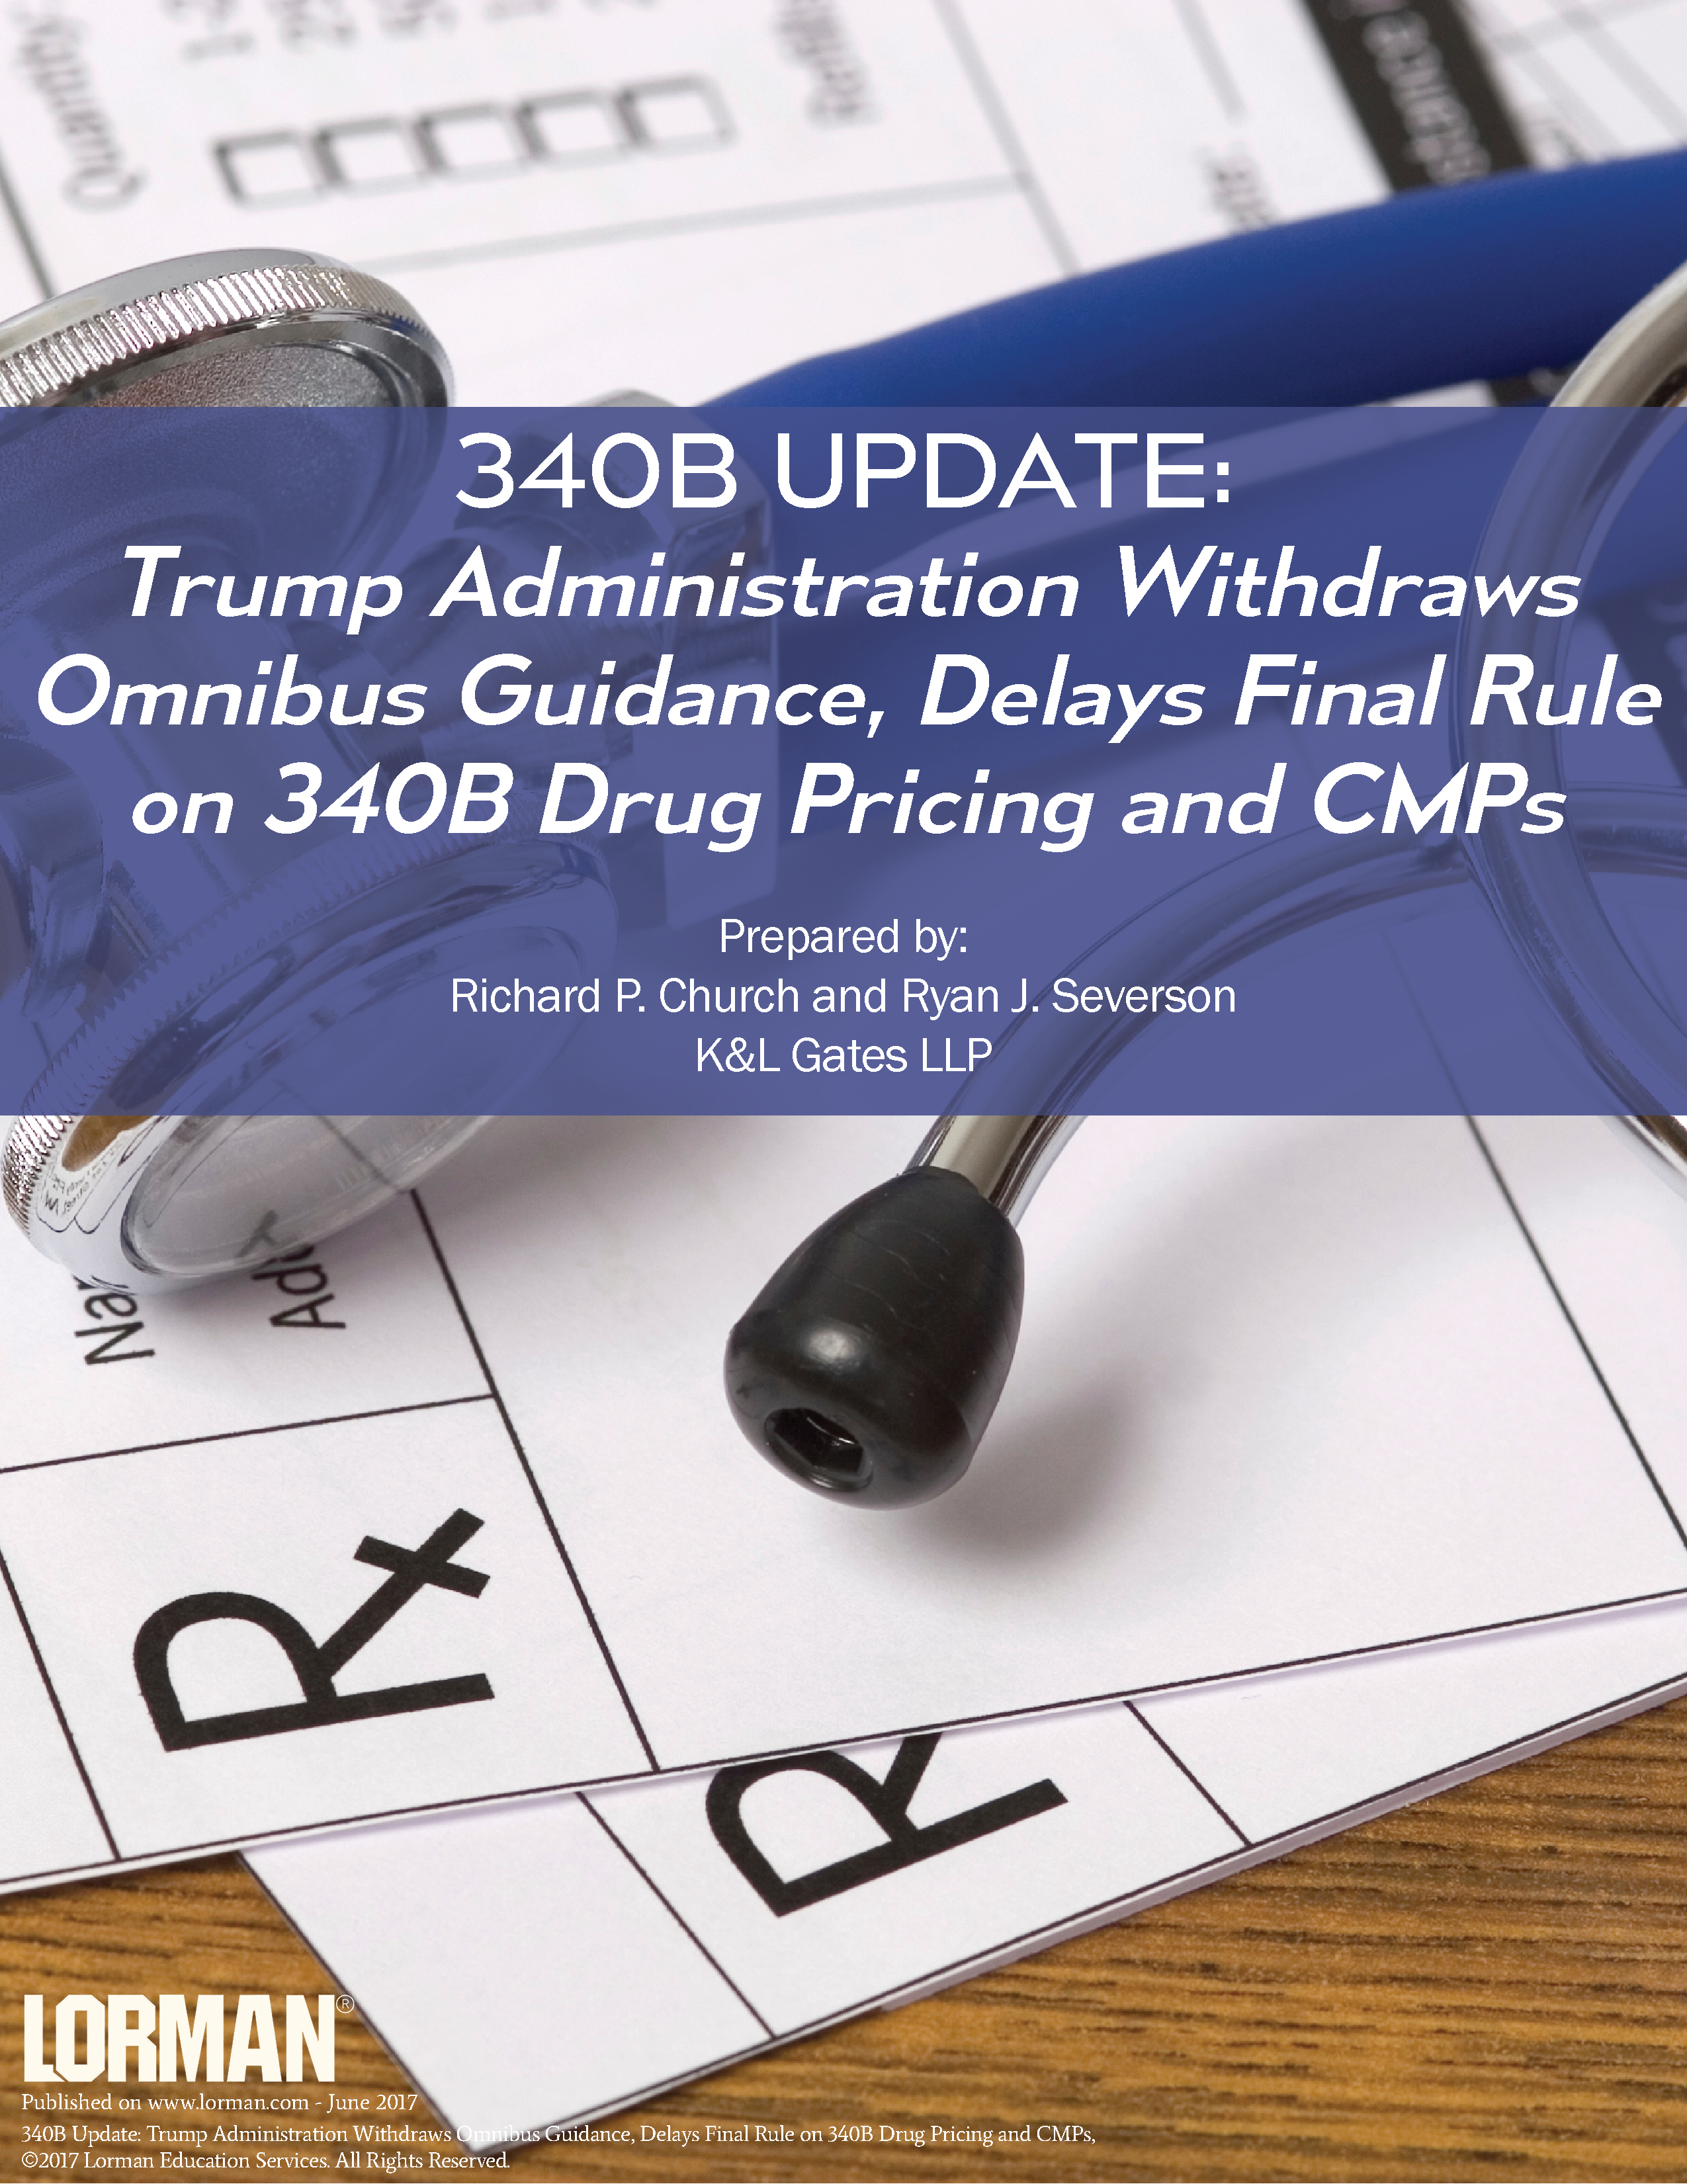 Trump Administration Withdraws Omnibus Guidance, Delays Final Rule on 340B Drug Pricing and CMPs